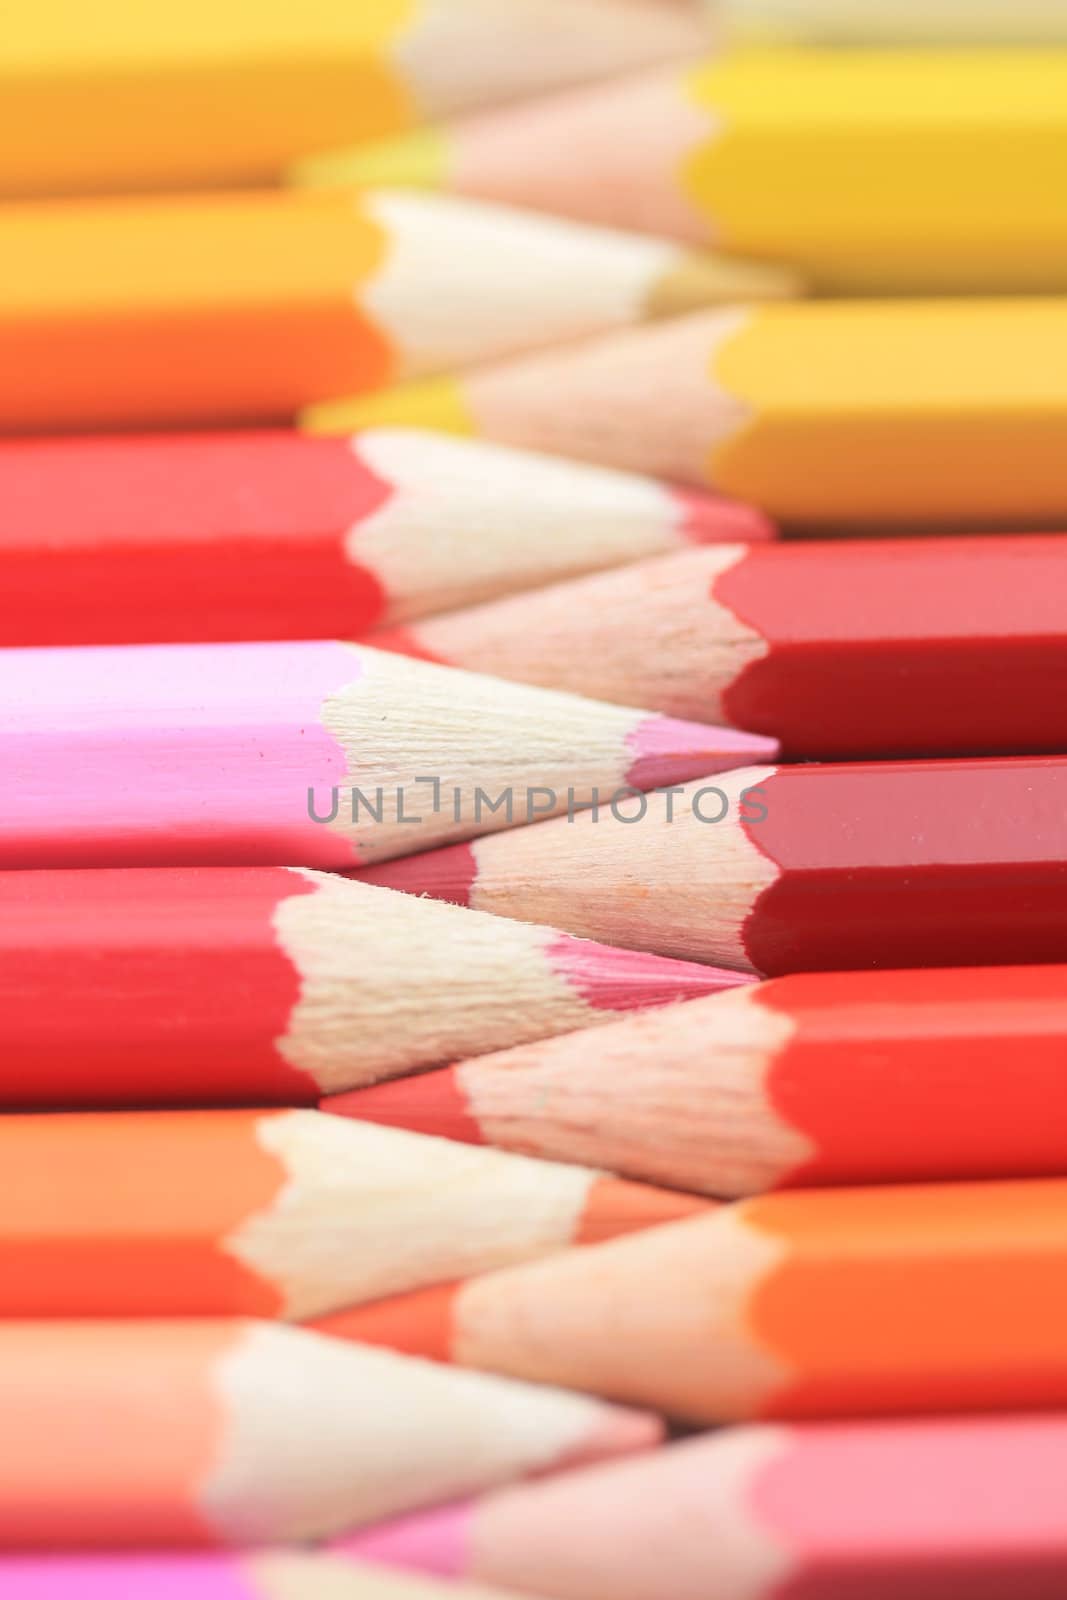 brand new sharp and unused color pencils